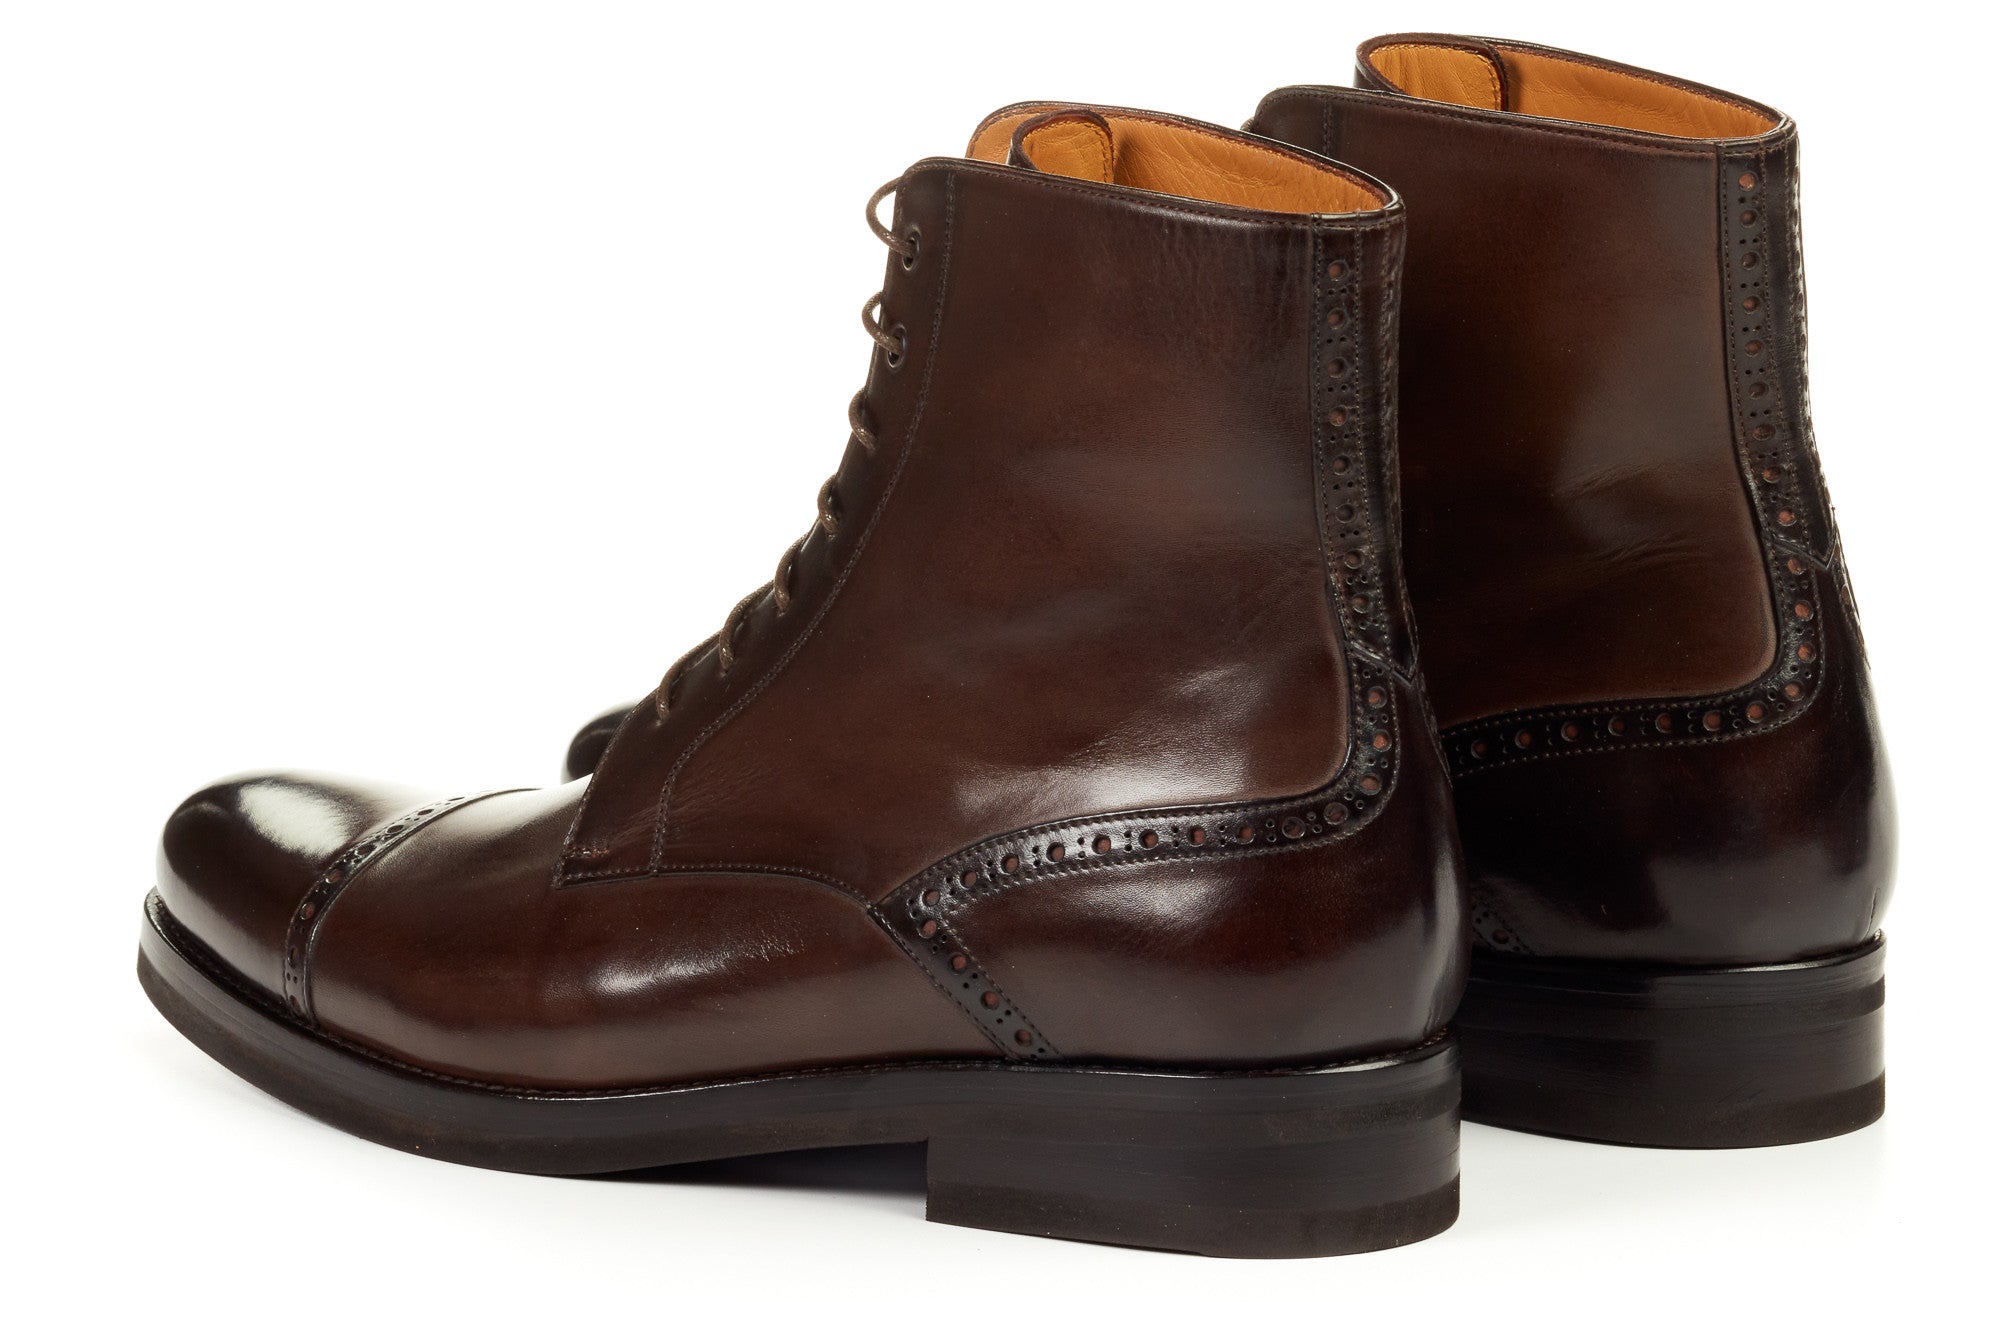 The Presley Lace-Up Boot - Chocolate - Rubber Sole